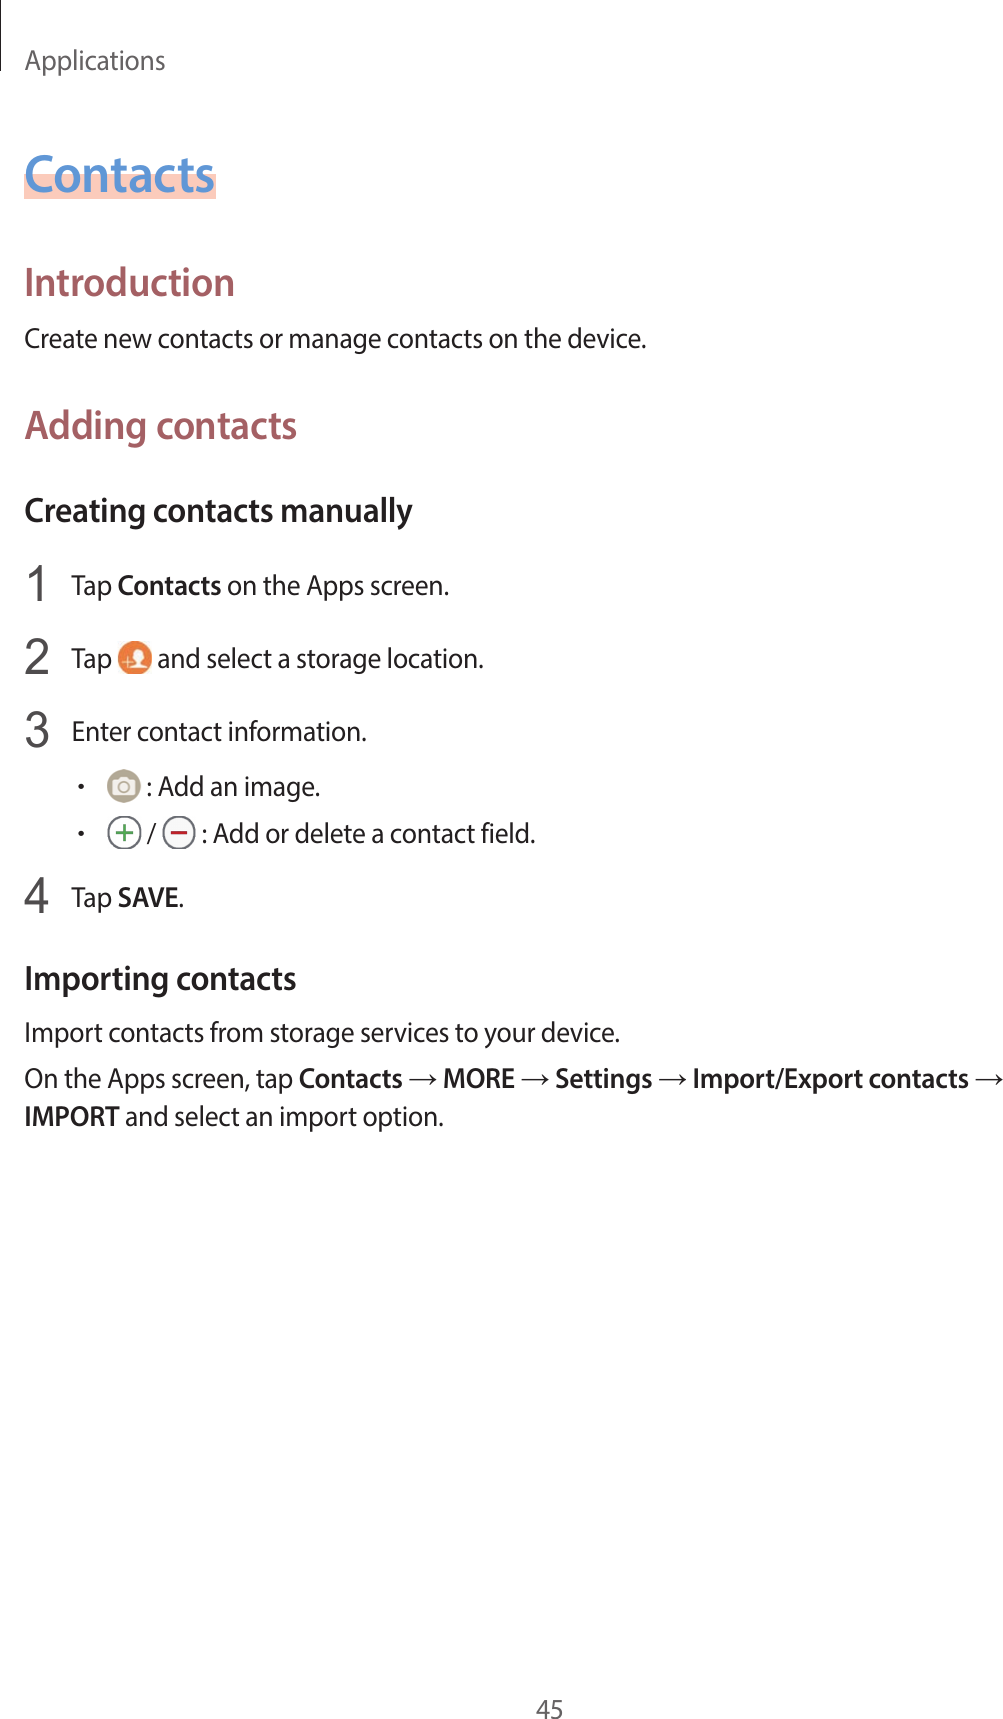 Applications45ContactsIntroductionCreate new contacts or manage contacts on the device.Adding contactsCreating contacts manually1  Tap Contacts on the Apps screen.2  Tap   and select a storage location.3  Enter contact information.• : Add an image.• /   : Add or delete a contact field.4  Tap SAVE.Importing contactsImport contacts from storage services to your device.On the Apps screen, tap Contacts → MORE → Settings → Import/Export contacts → IMPORT and select an import option.